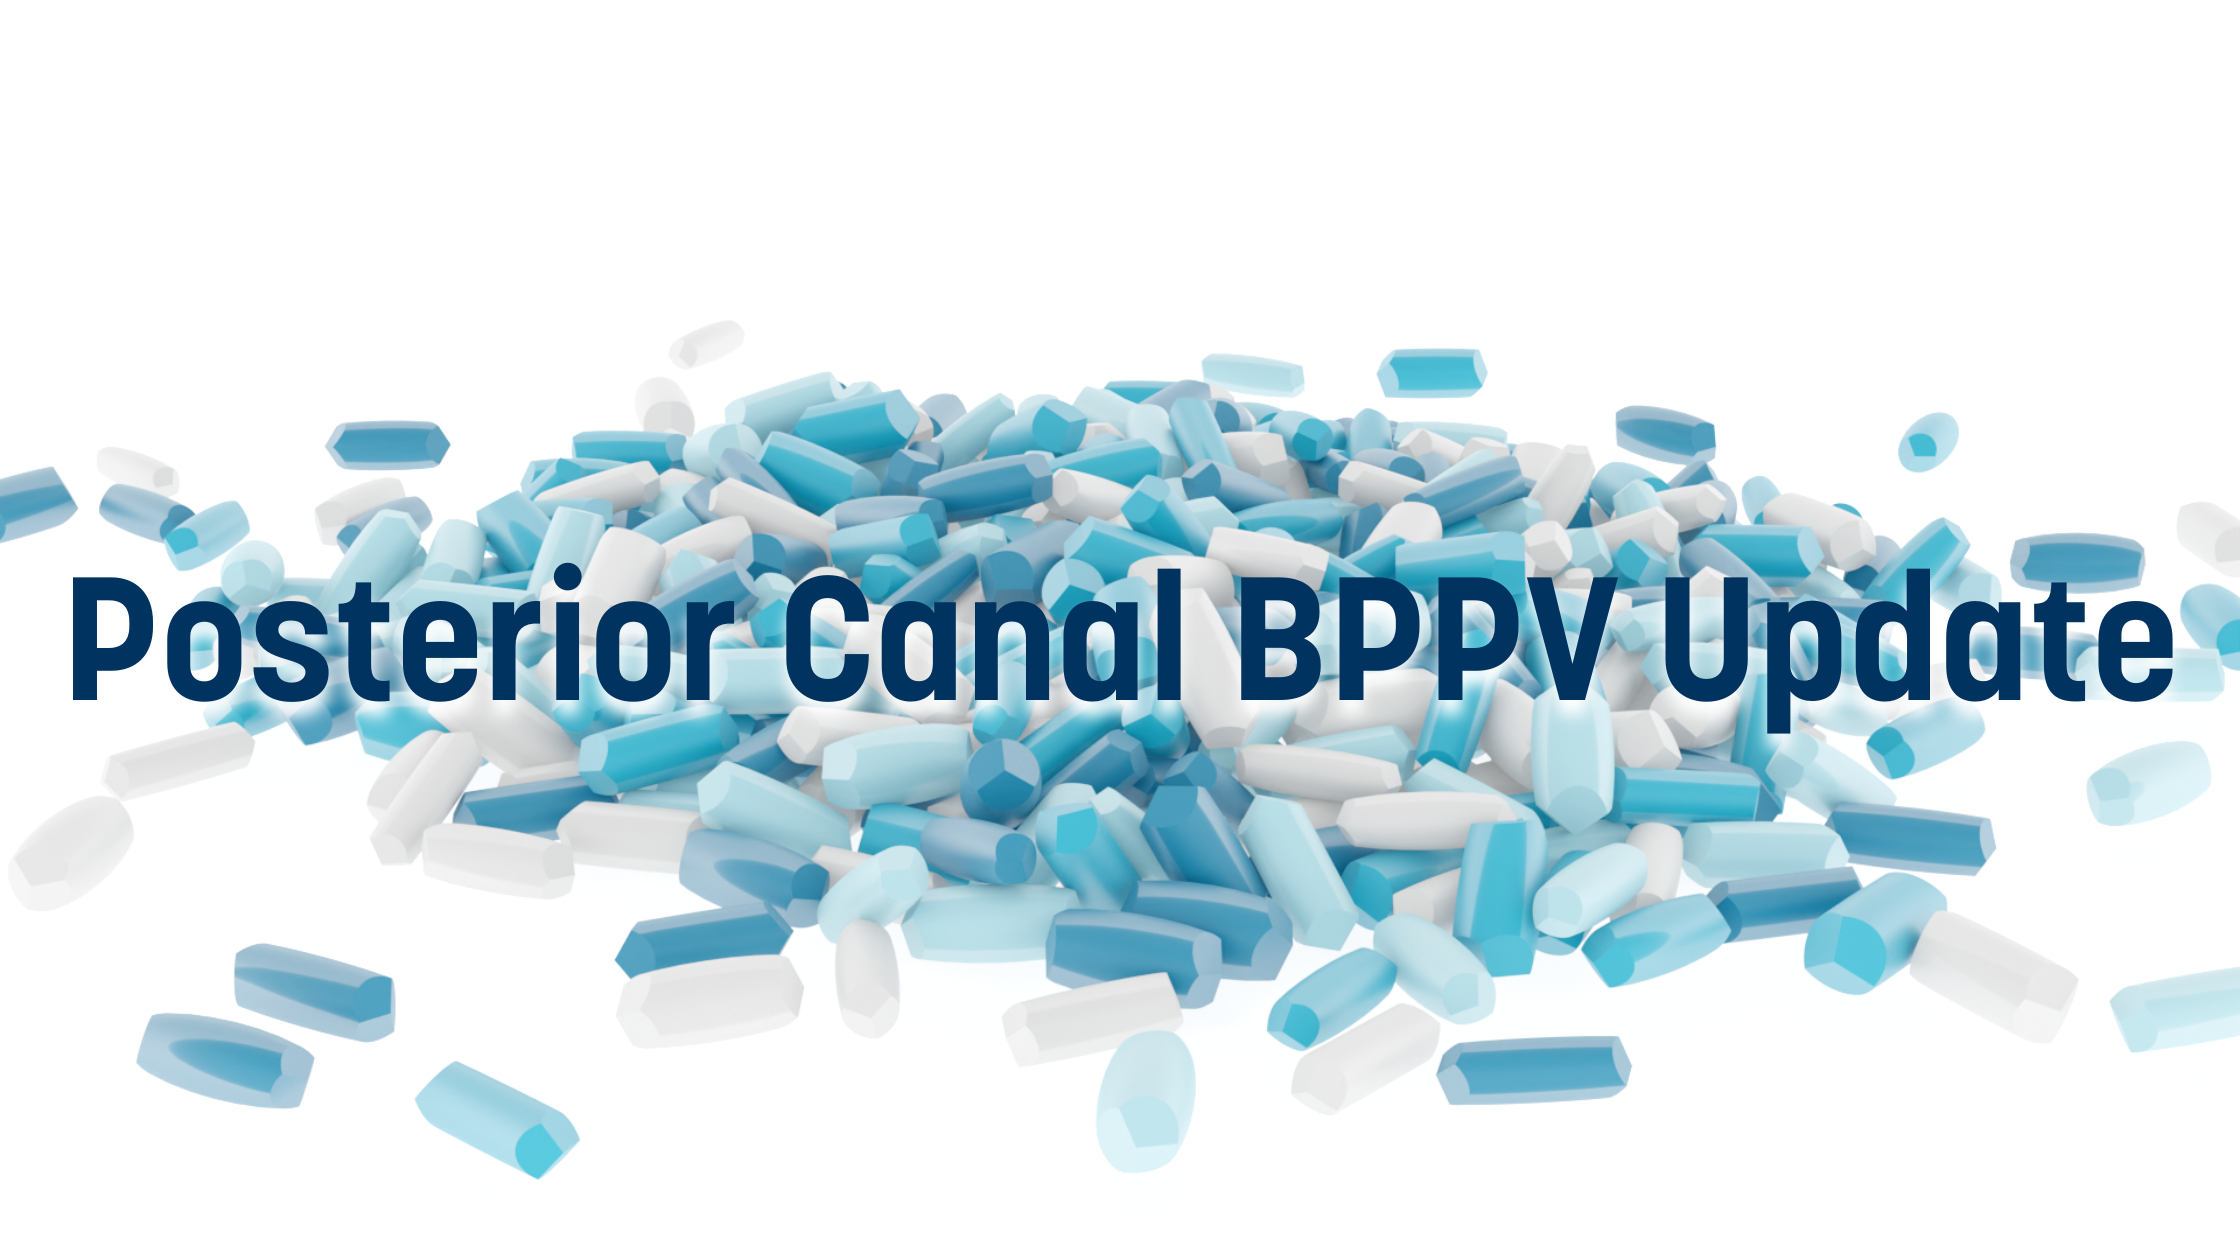 posterior canal bppv update 2